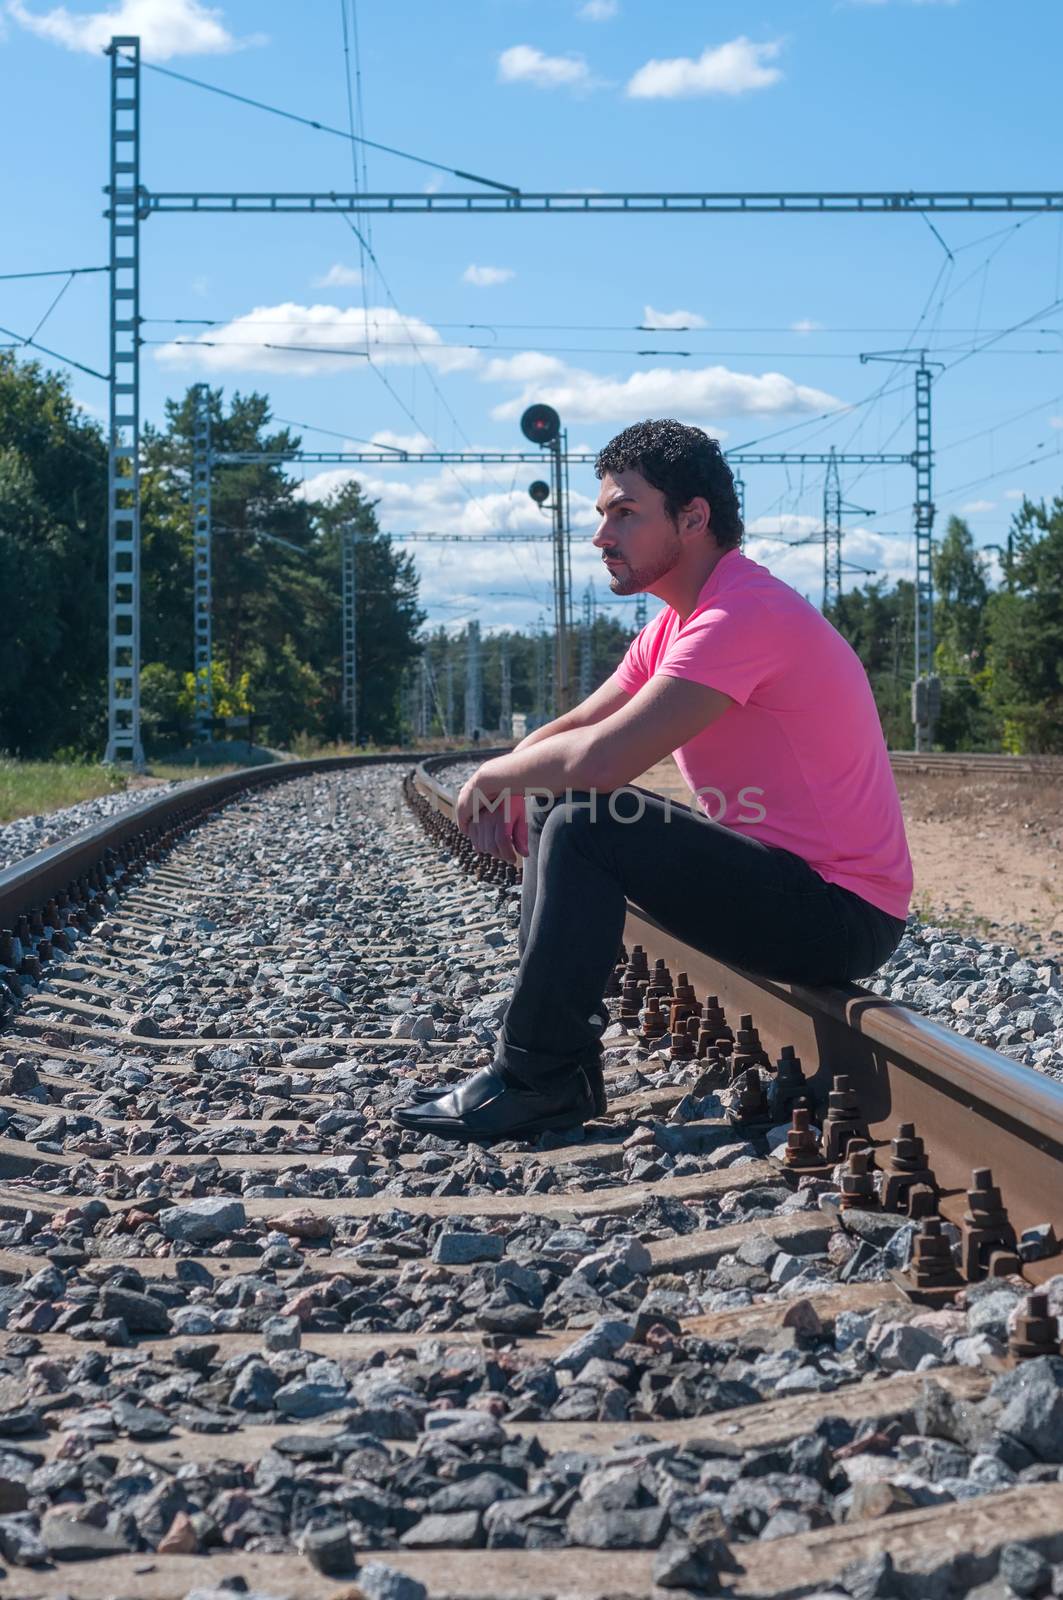 One man in pink t-shirt sitting on train tracks by anytka